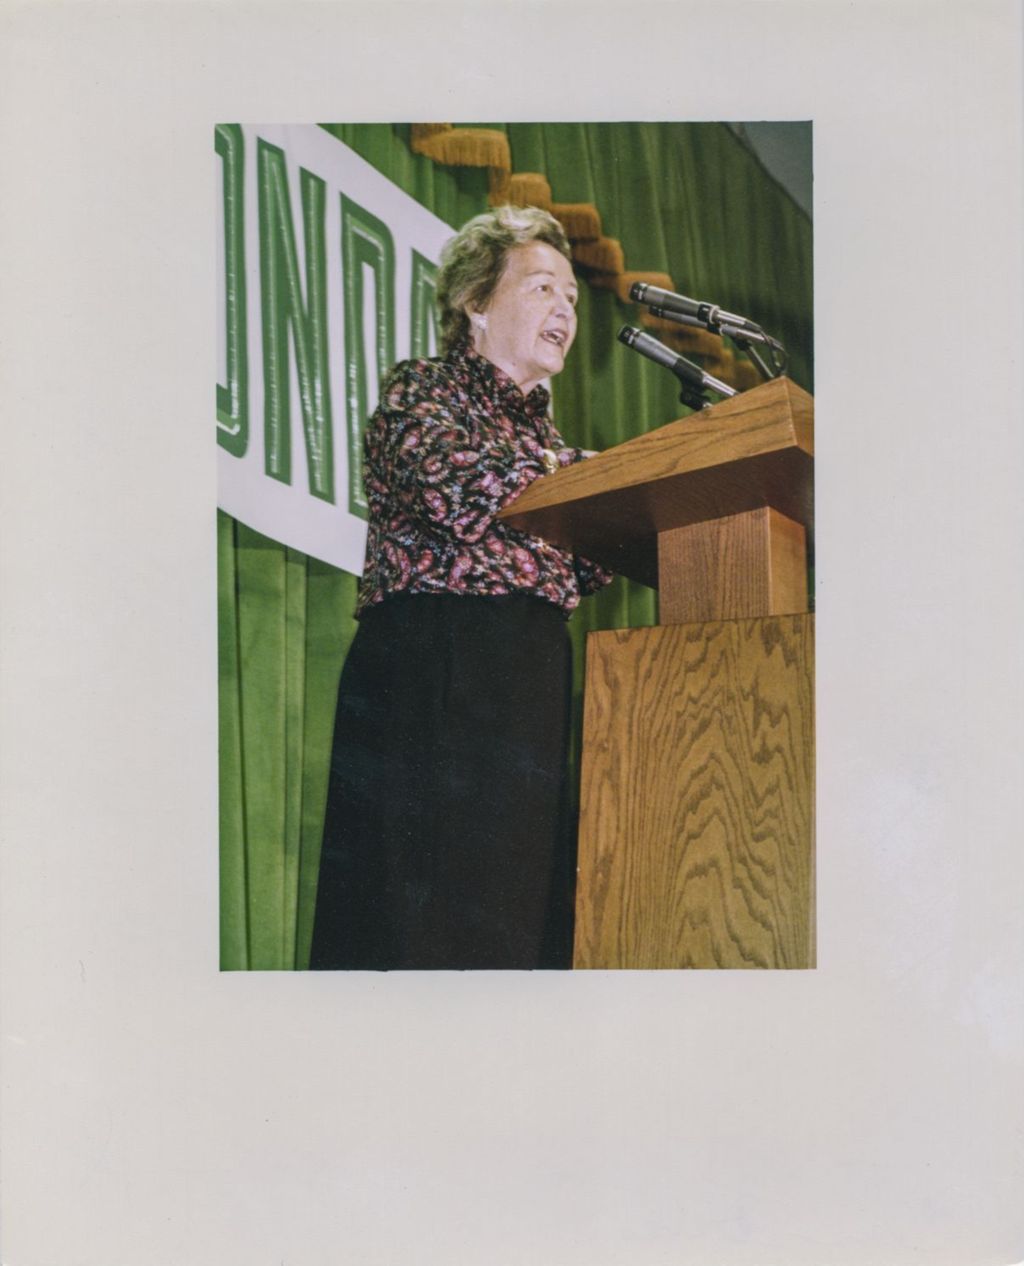 Miniature of Eleanor Daley speaking at a campaign event for Walter Mondale